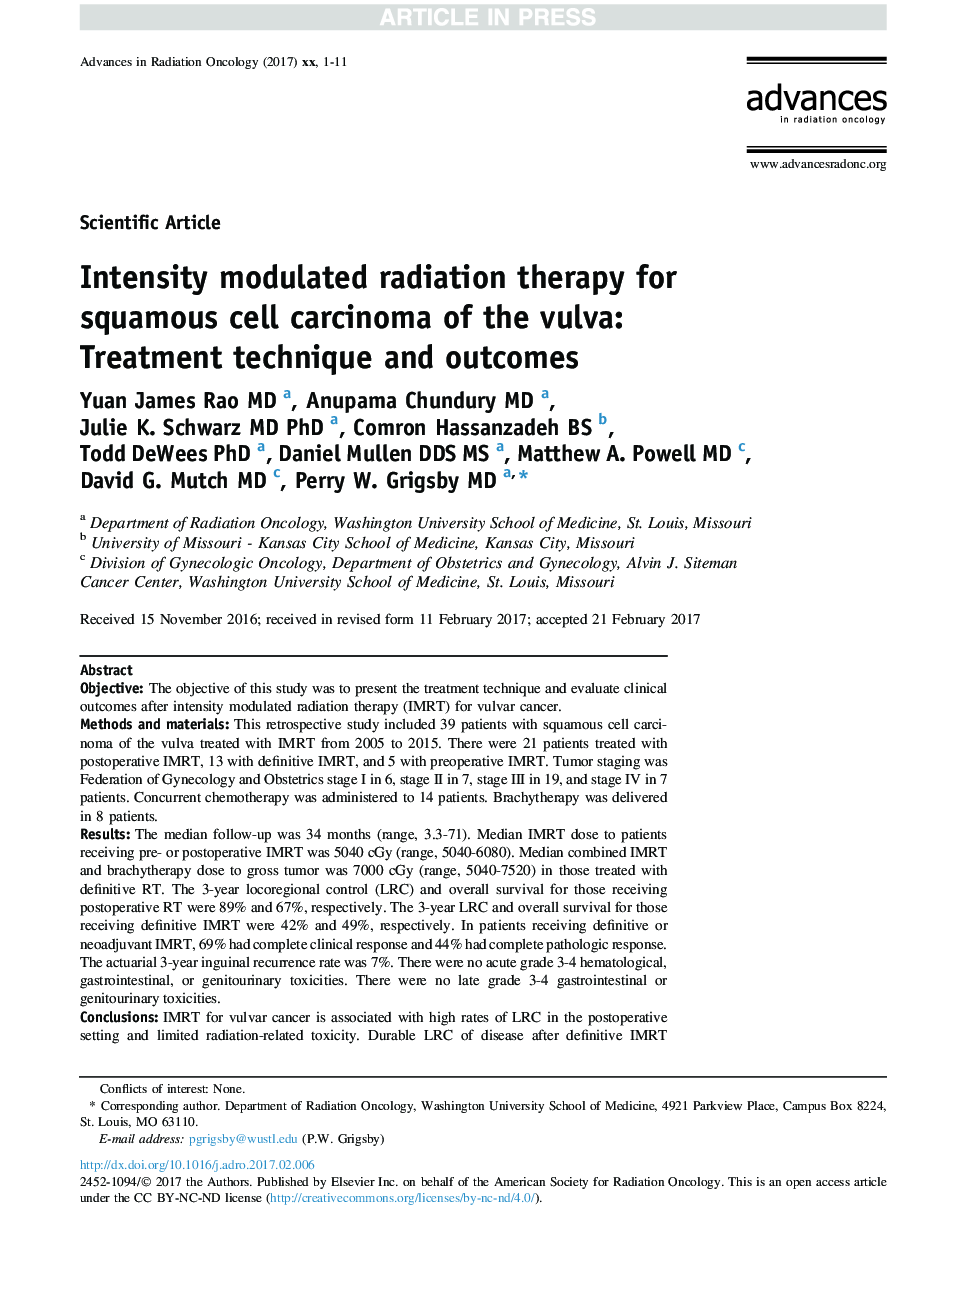 Intensity modulated radiation therapy for squamous cell carcinoma of the vulva: Treatment technique and outcomes